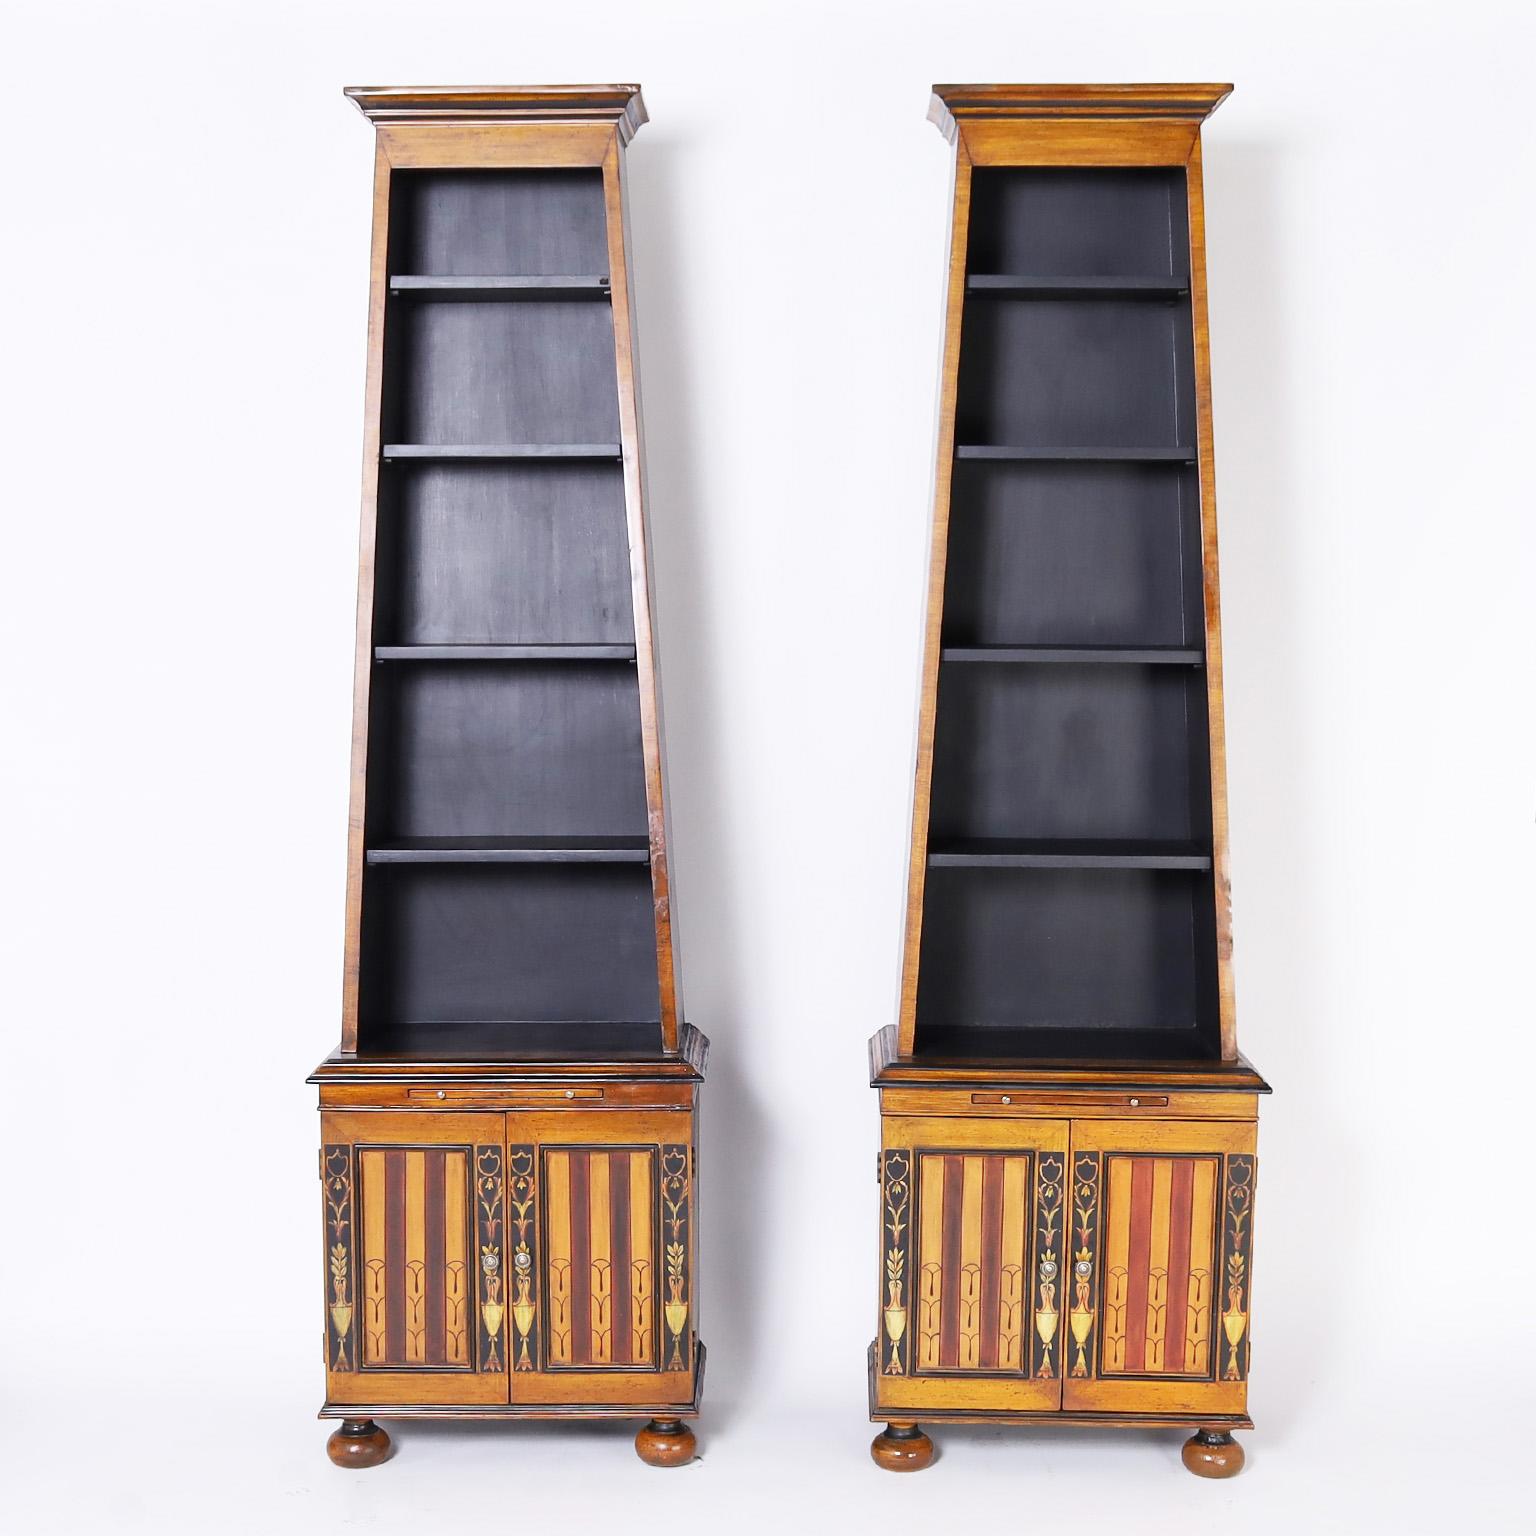 Impressive pair of bookcases or etageres with a dramatic stylized obelisk form crafted in hardwoods and decorated with classic Adam style designs under a contrived aged finish complete with fly specks.